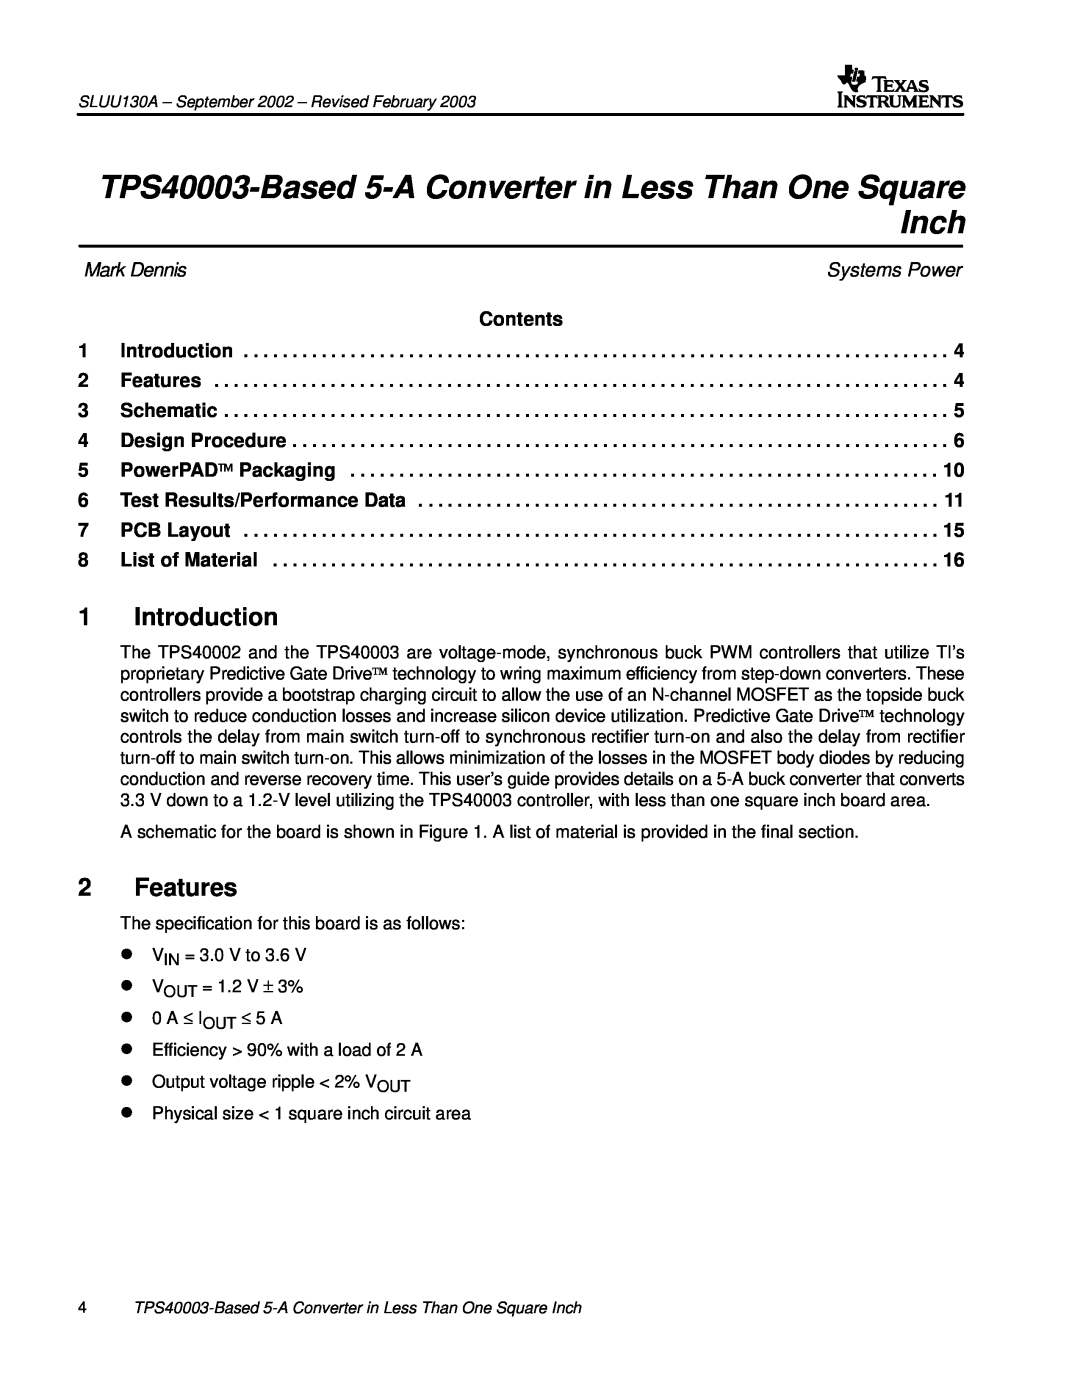 Texas Instruments manual Introduction, Features, TPS40003-Based 5-A Converter in Less Than One Square Inch, Mark Dennis 